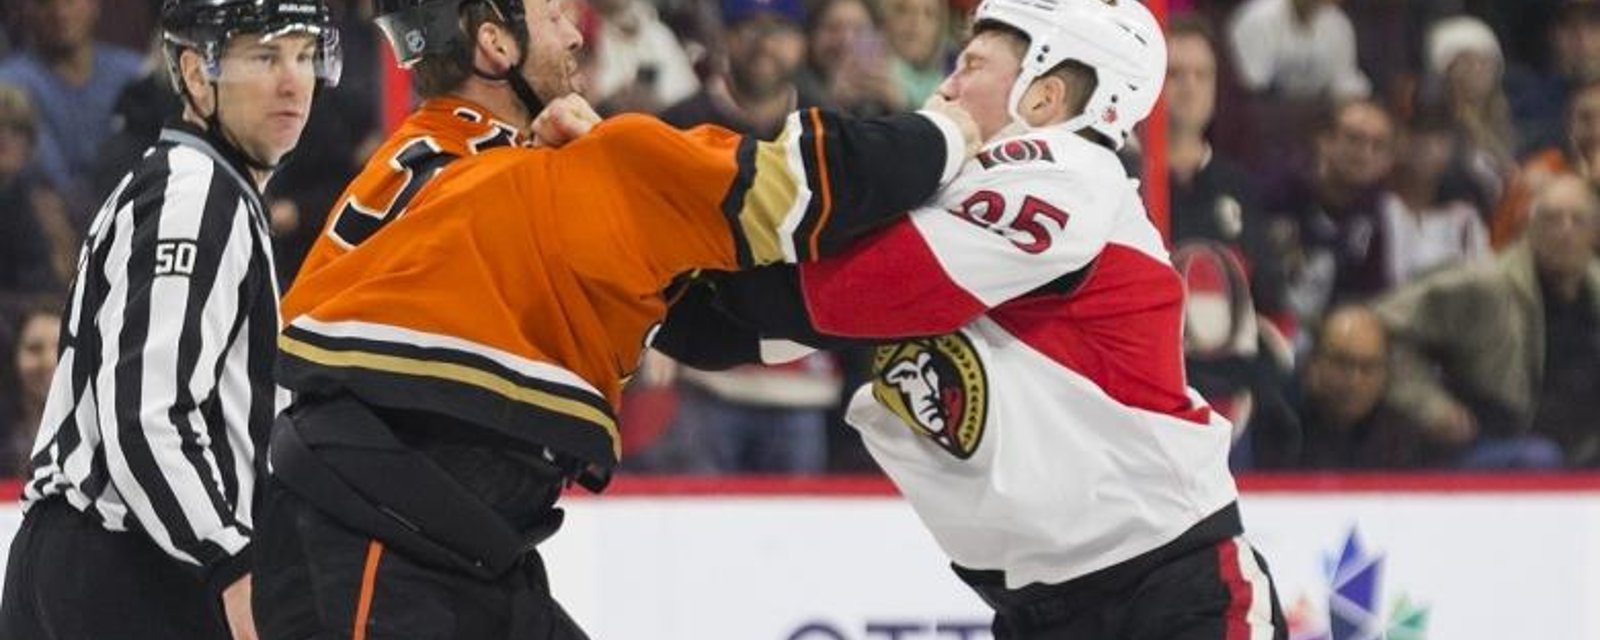 Breaking: First signs of potential anti-fighting rule changes coming to the NHL.